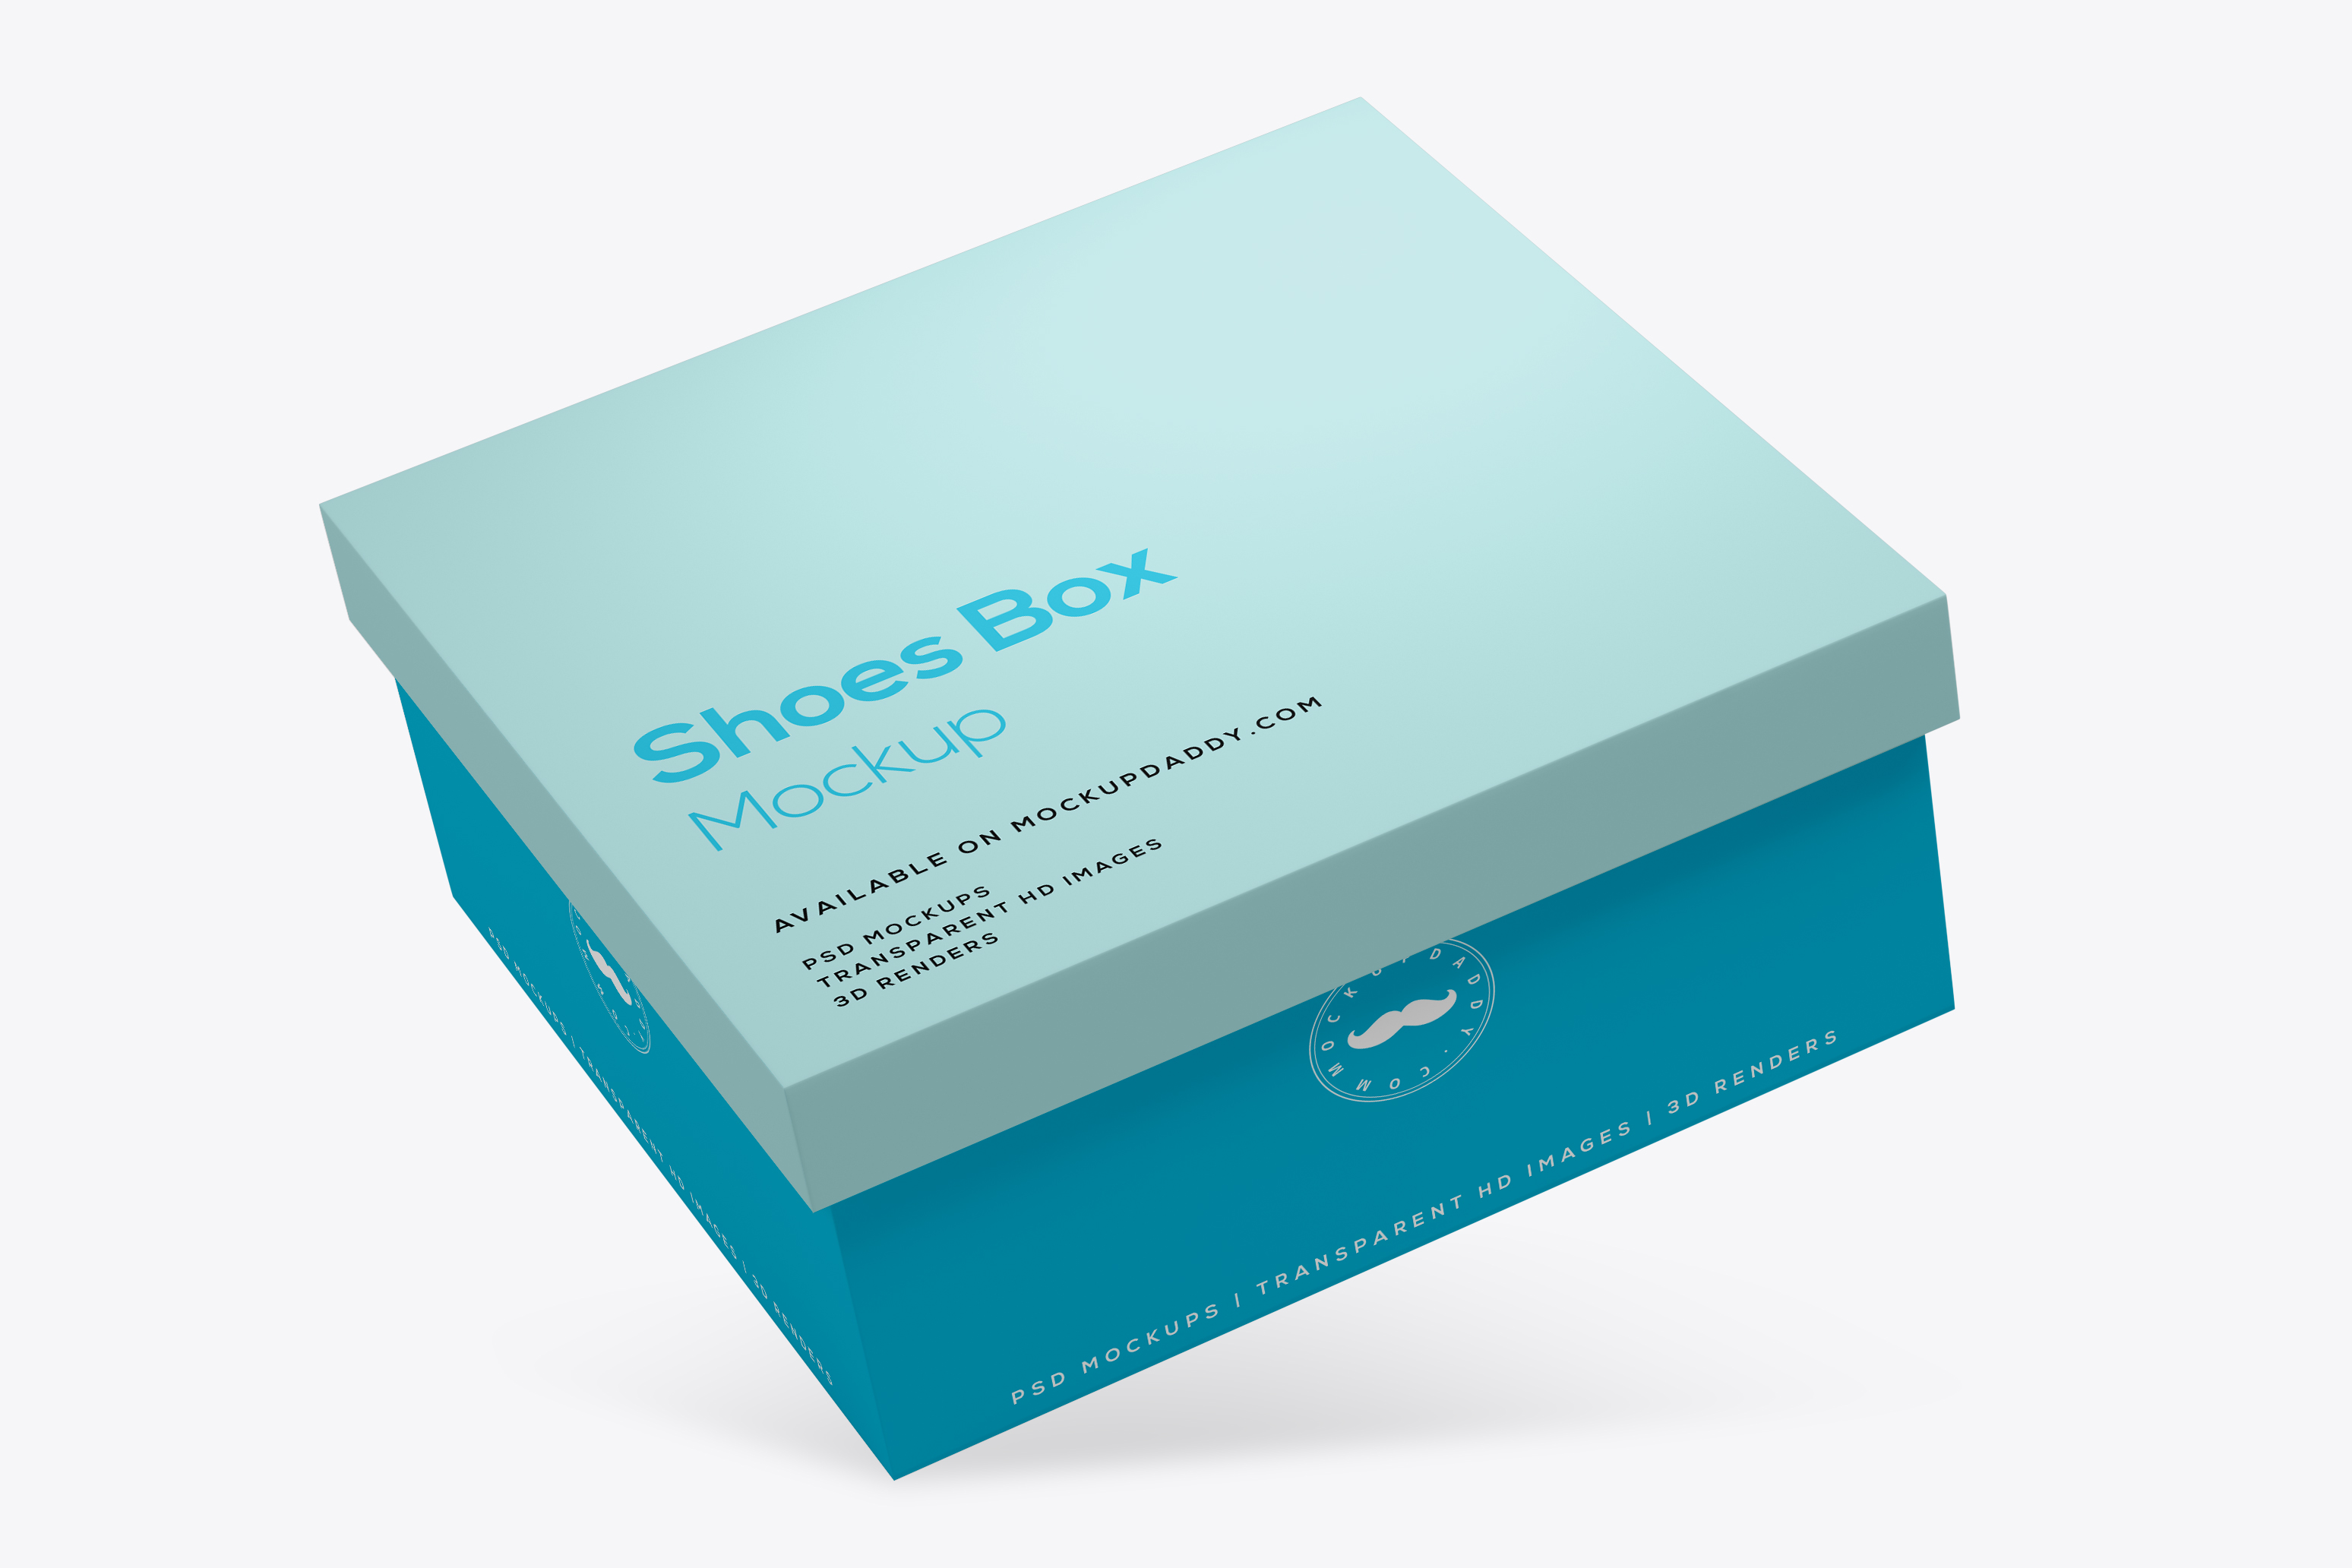 Download Square Shoes Box Mockup Free Download - Mockup Daddy